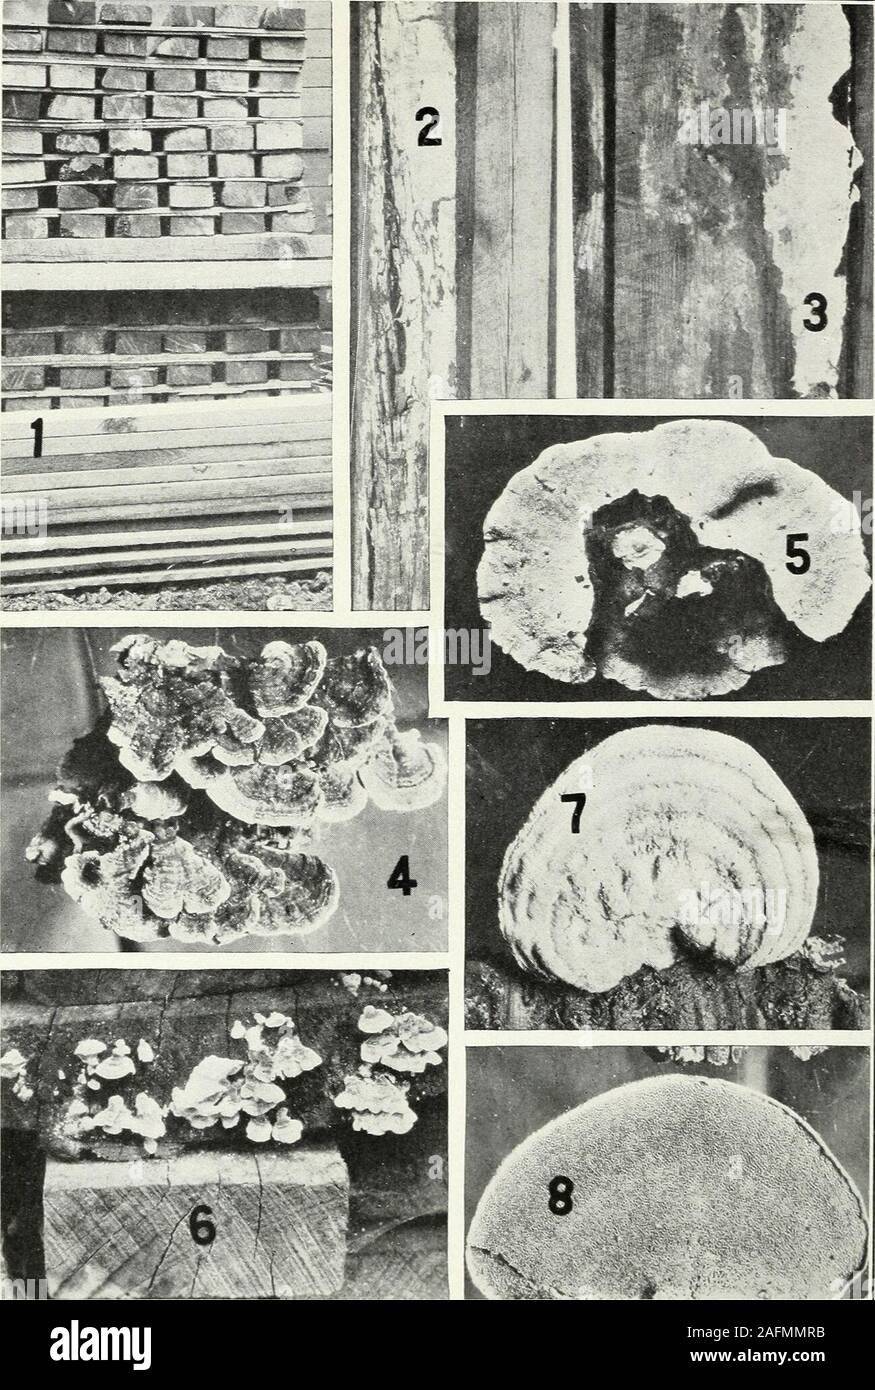 . Timber storage conditions in the eastern and southern states with reference to decay problems. Lumber Sanitation: Wood-Rotting Fungi.—III. Fig. 1.—A pile of rejected hardwood logs which should have been removed or destroyed and not leftto breed fungi (fruit bodies of 6 or 7 different organisms were identified from this pile). Fig. 2.—Lenzitcs ocrtdcyi fruiting on a hardwood tie. Fig. 3.—Hardwood pile foundations severely infectedwith Polystictus versicolor. Fig. 4.—Daedalea qucrcina fruiting around a foundation block in a Penn-sylvania storage yard. Fig. 5.—A badly infected piling stick in u Stock Photo